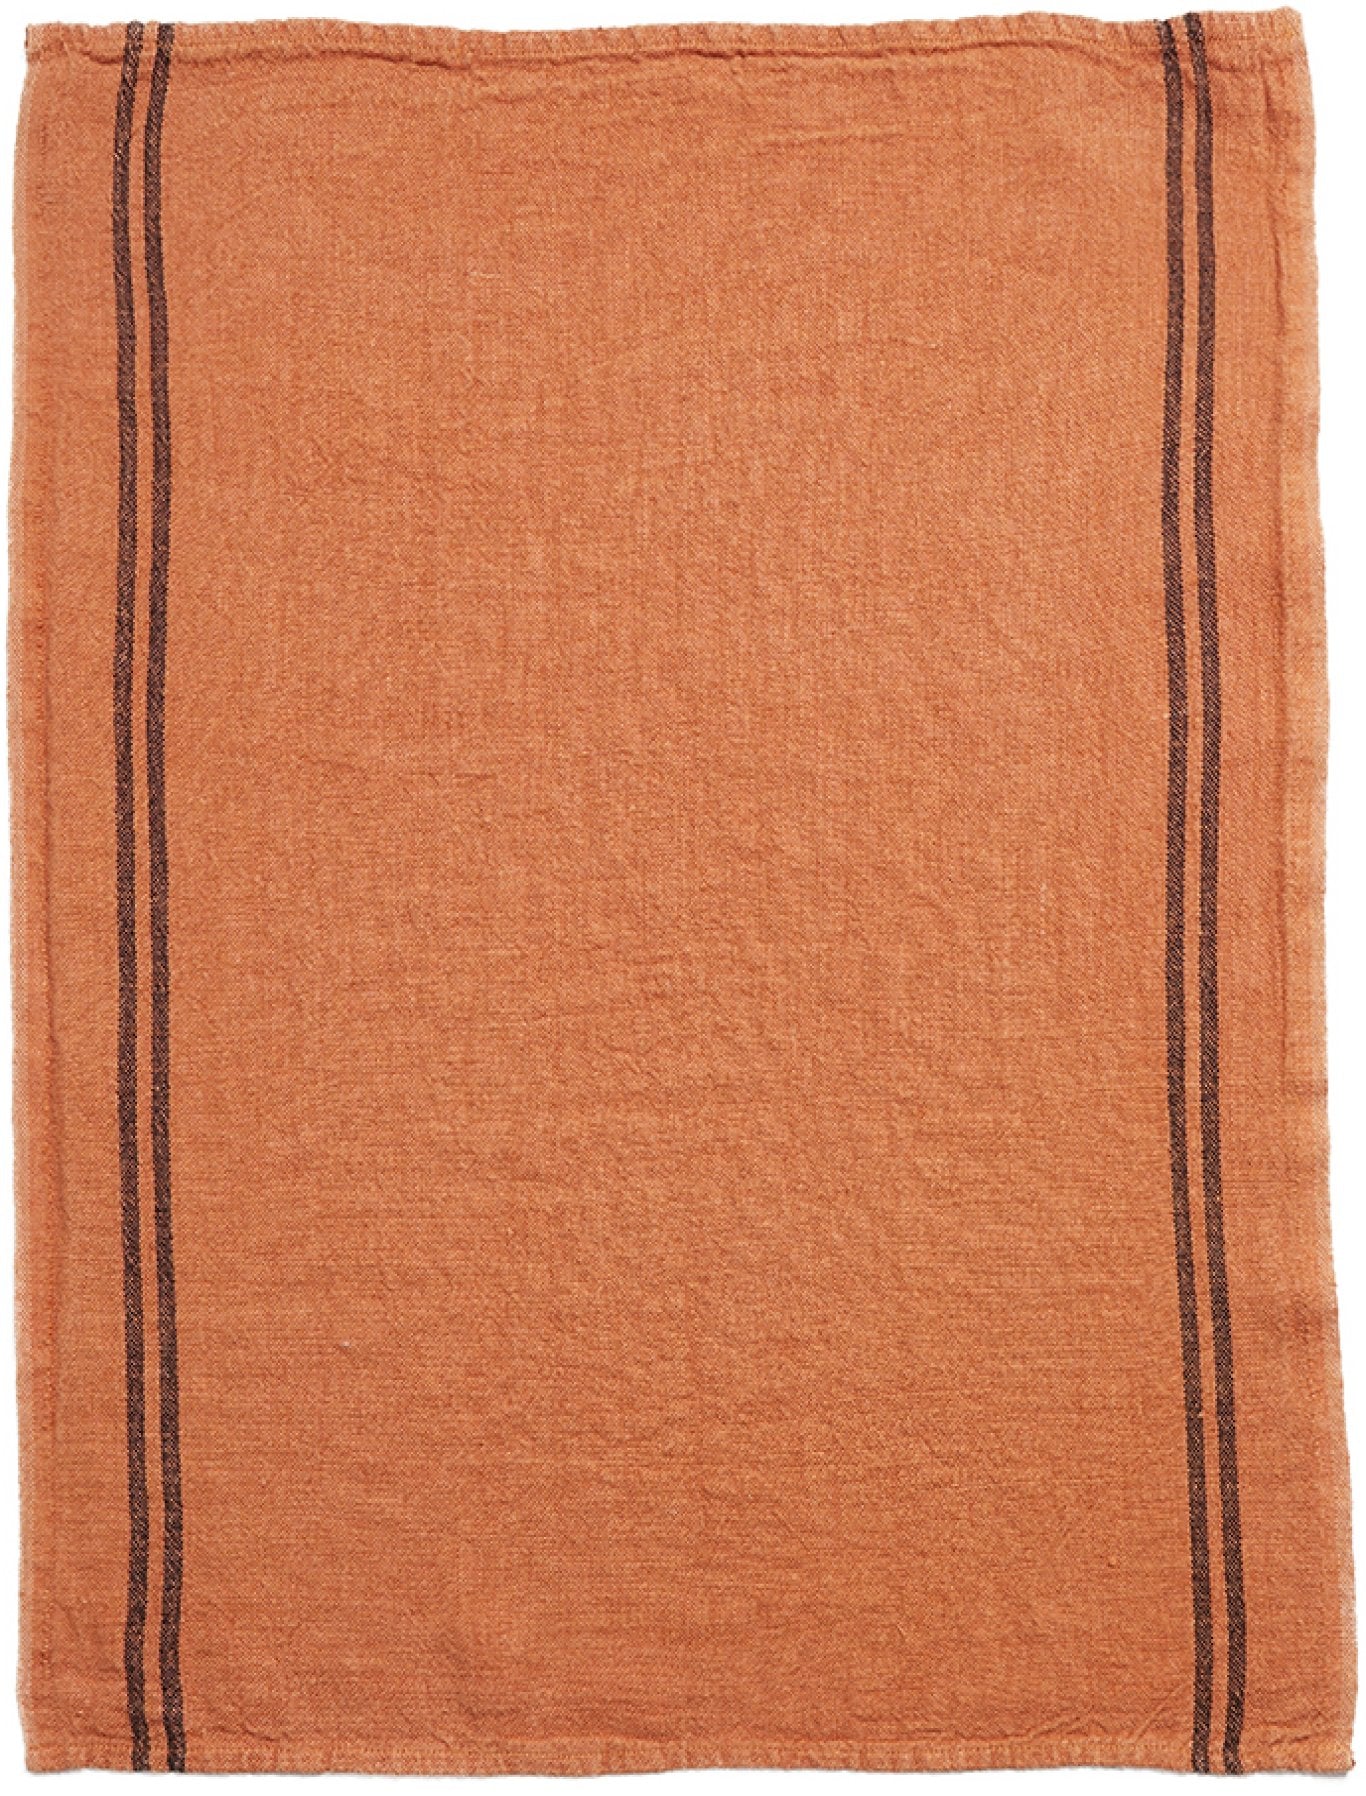 Charvet Editions "Country Washed & Dyed" (Carotte), Natural woven linen tea towel. Made in France.